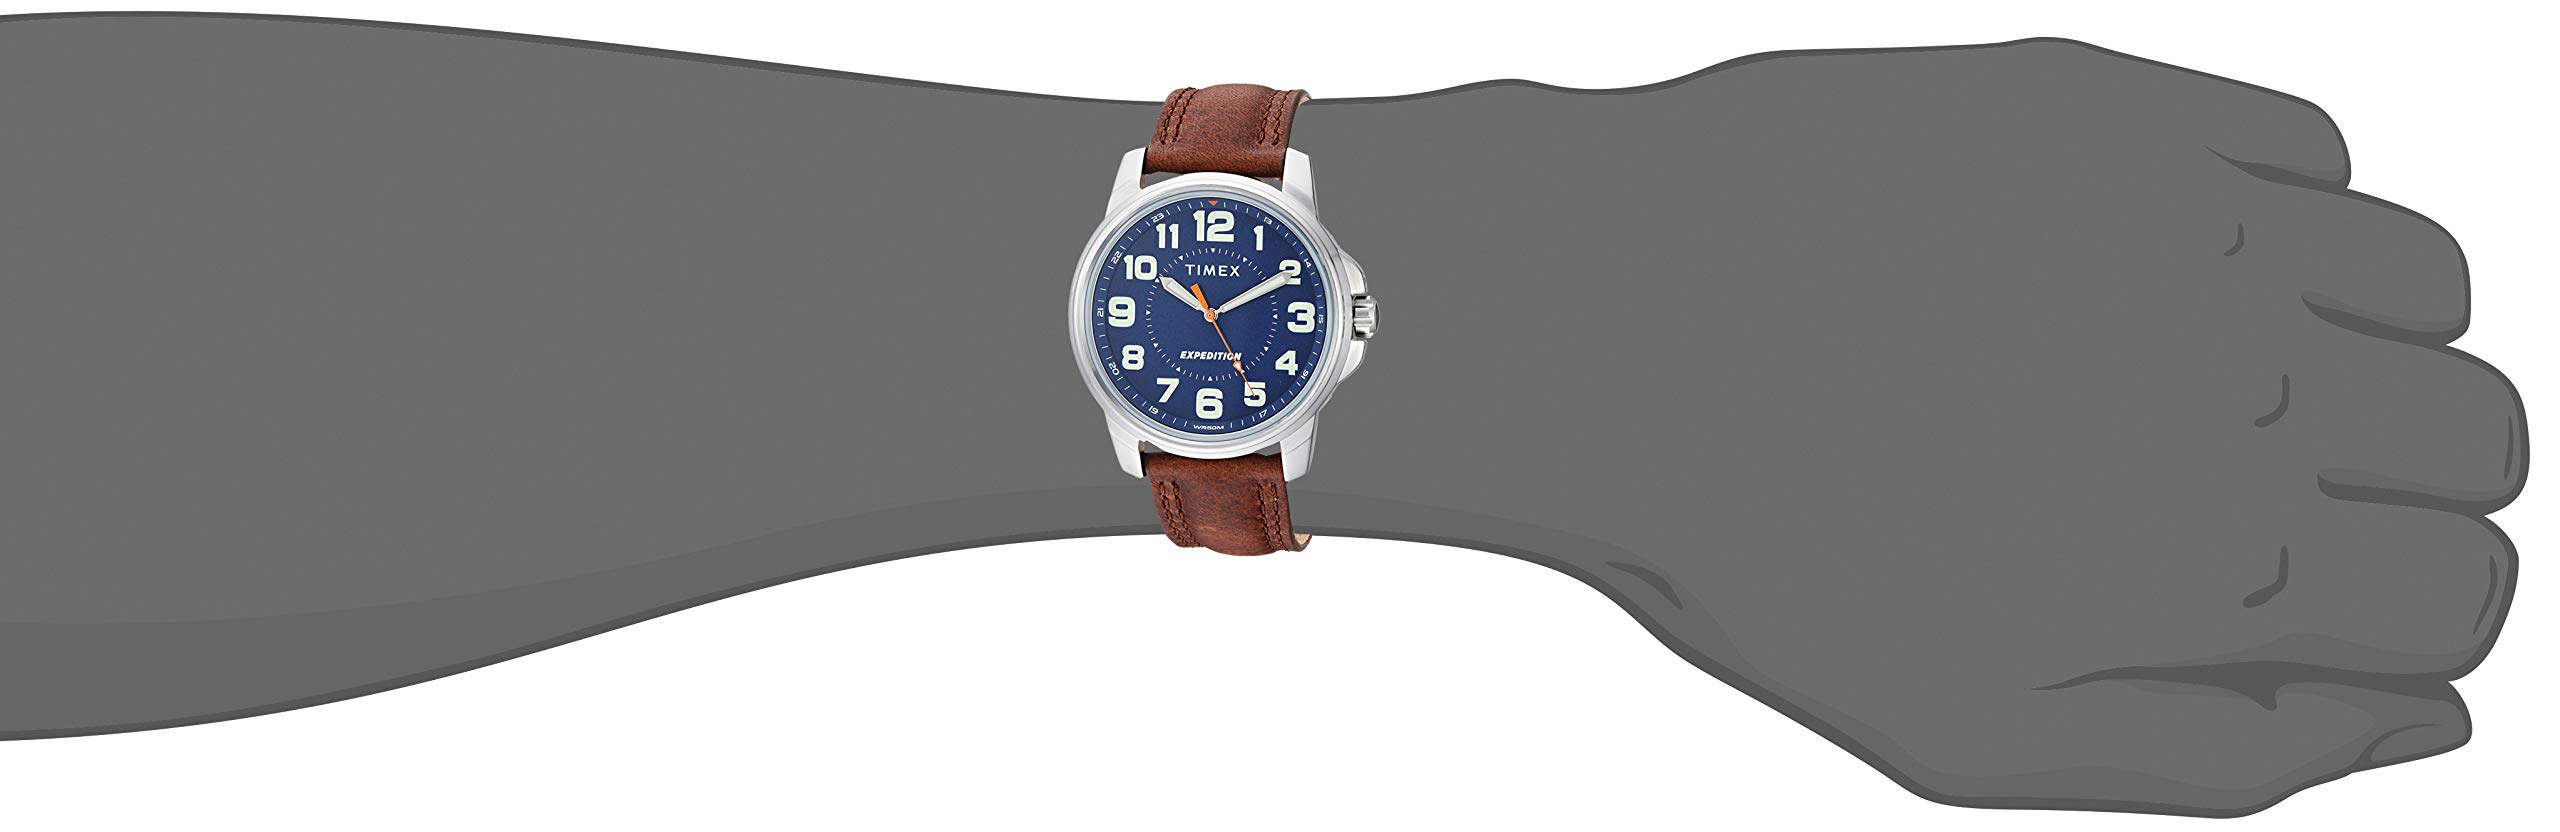 Timex Men's Expedition Metal Field Watch